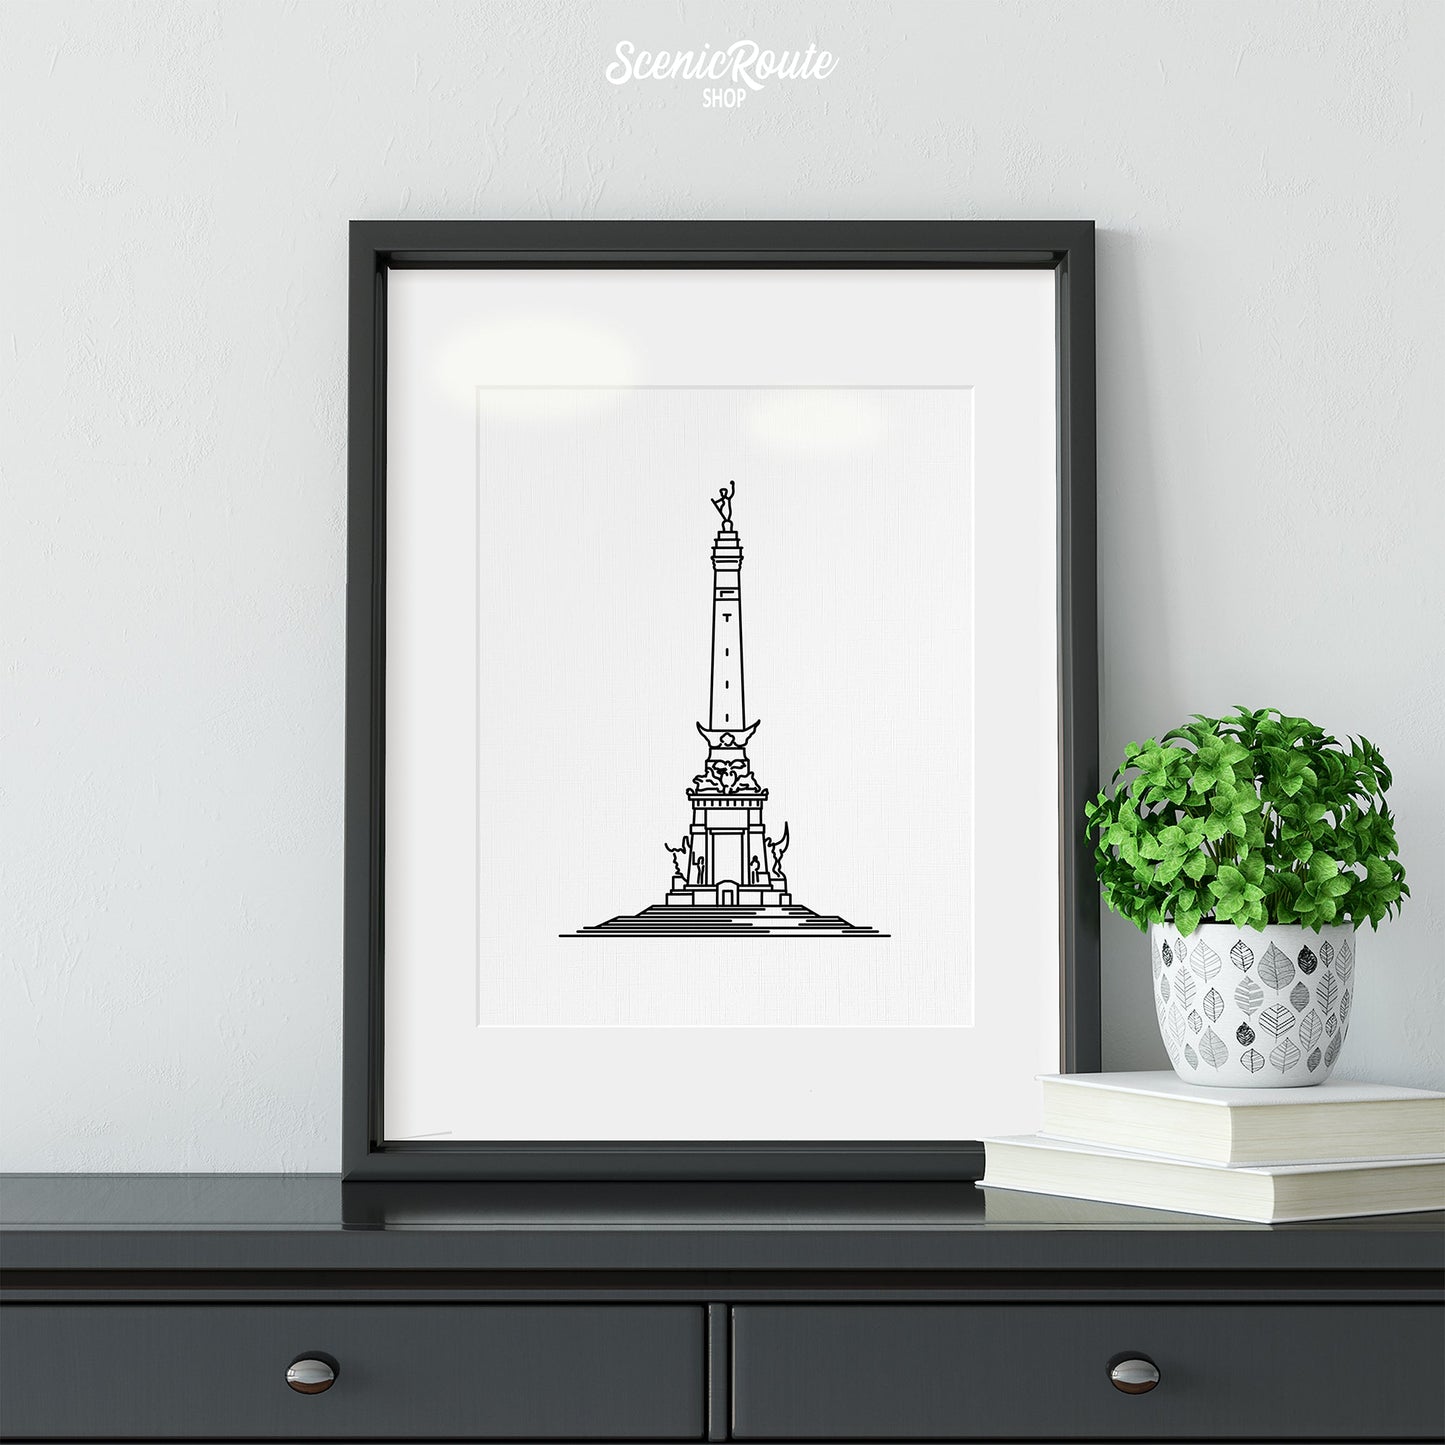 A framed line art drawing of the Soldiers and Sailors Monument on a dresser with a plant